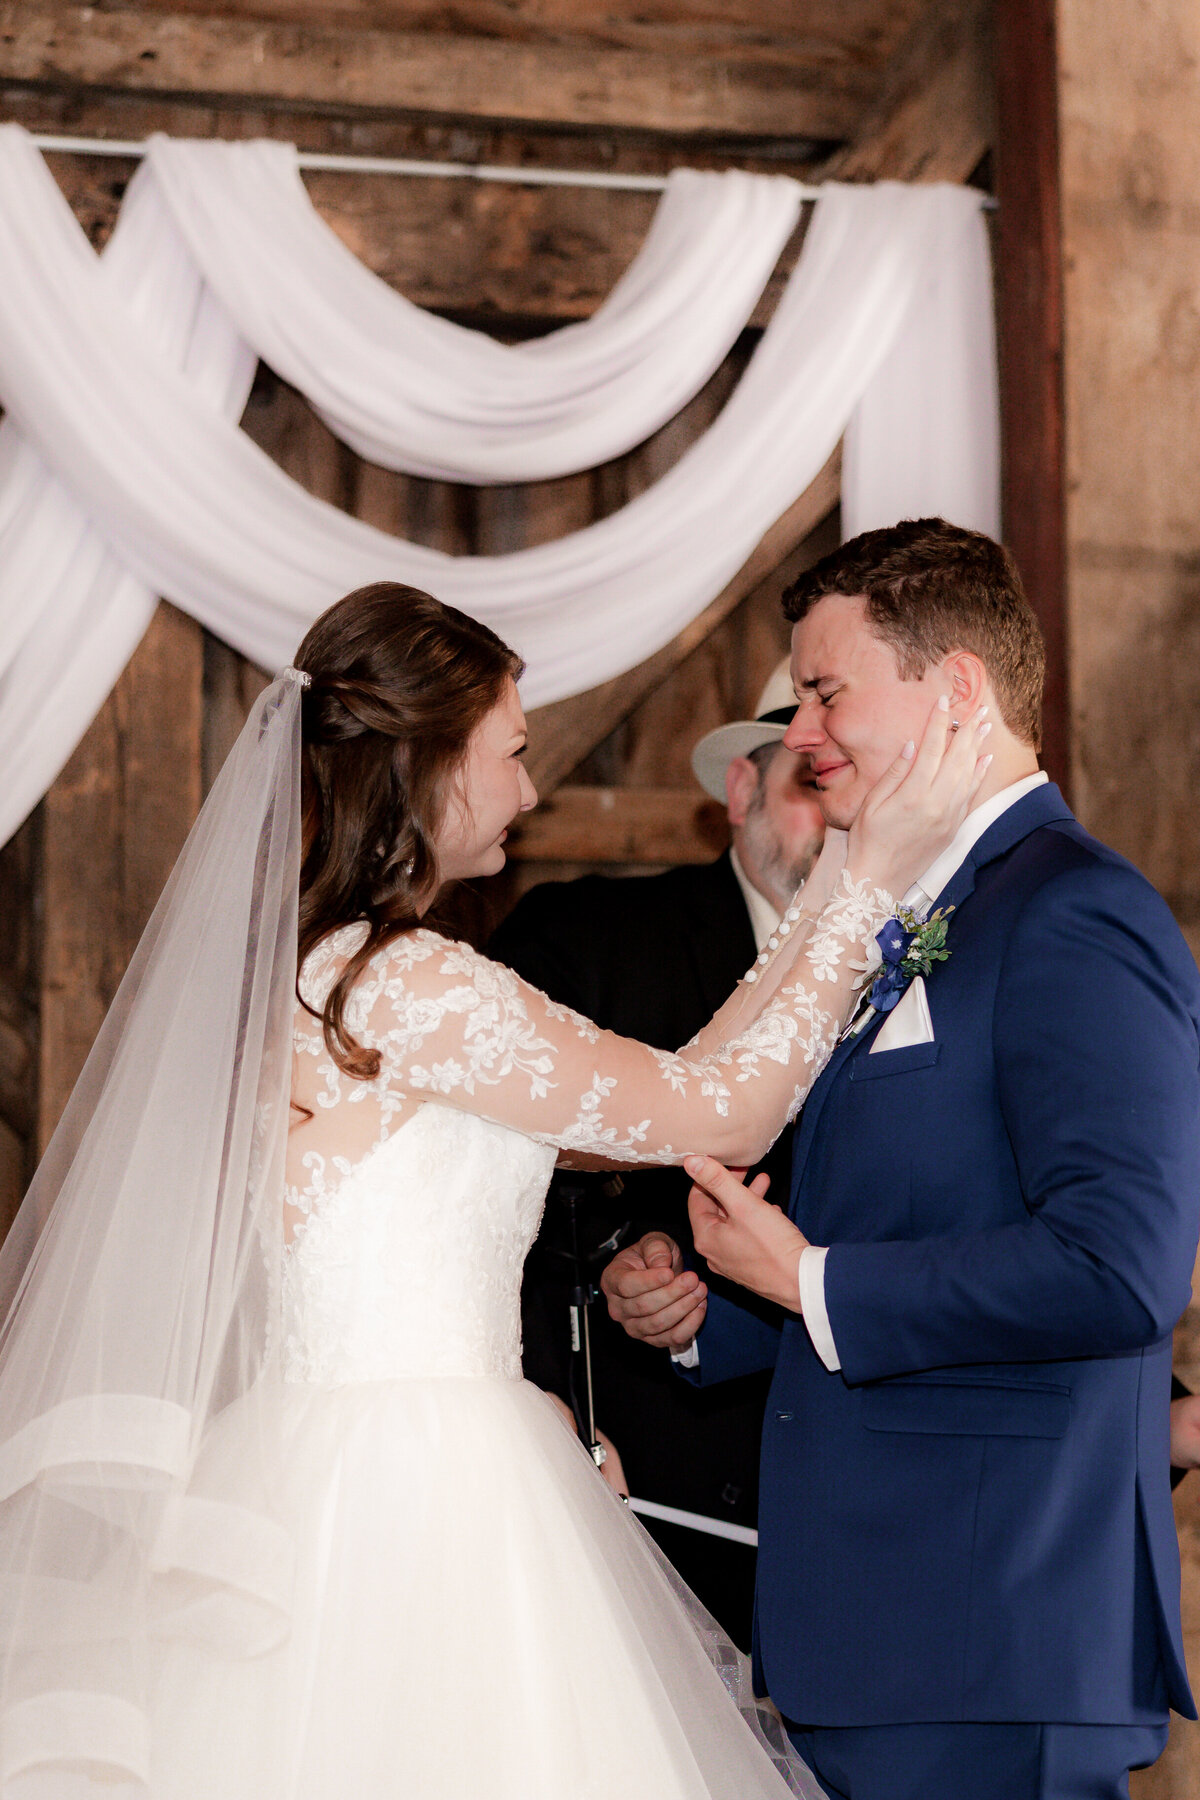 Lori wipes away the tears from her grooms face during their emotional vow exchange.